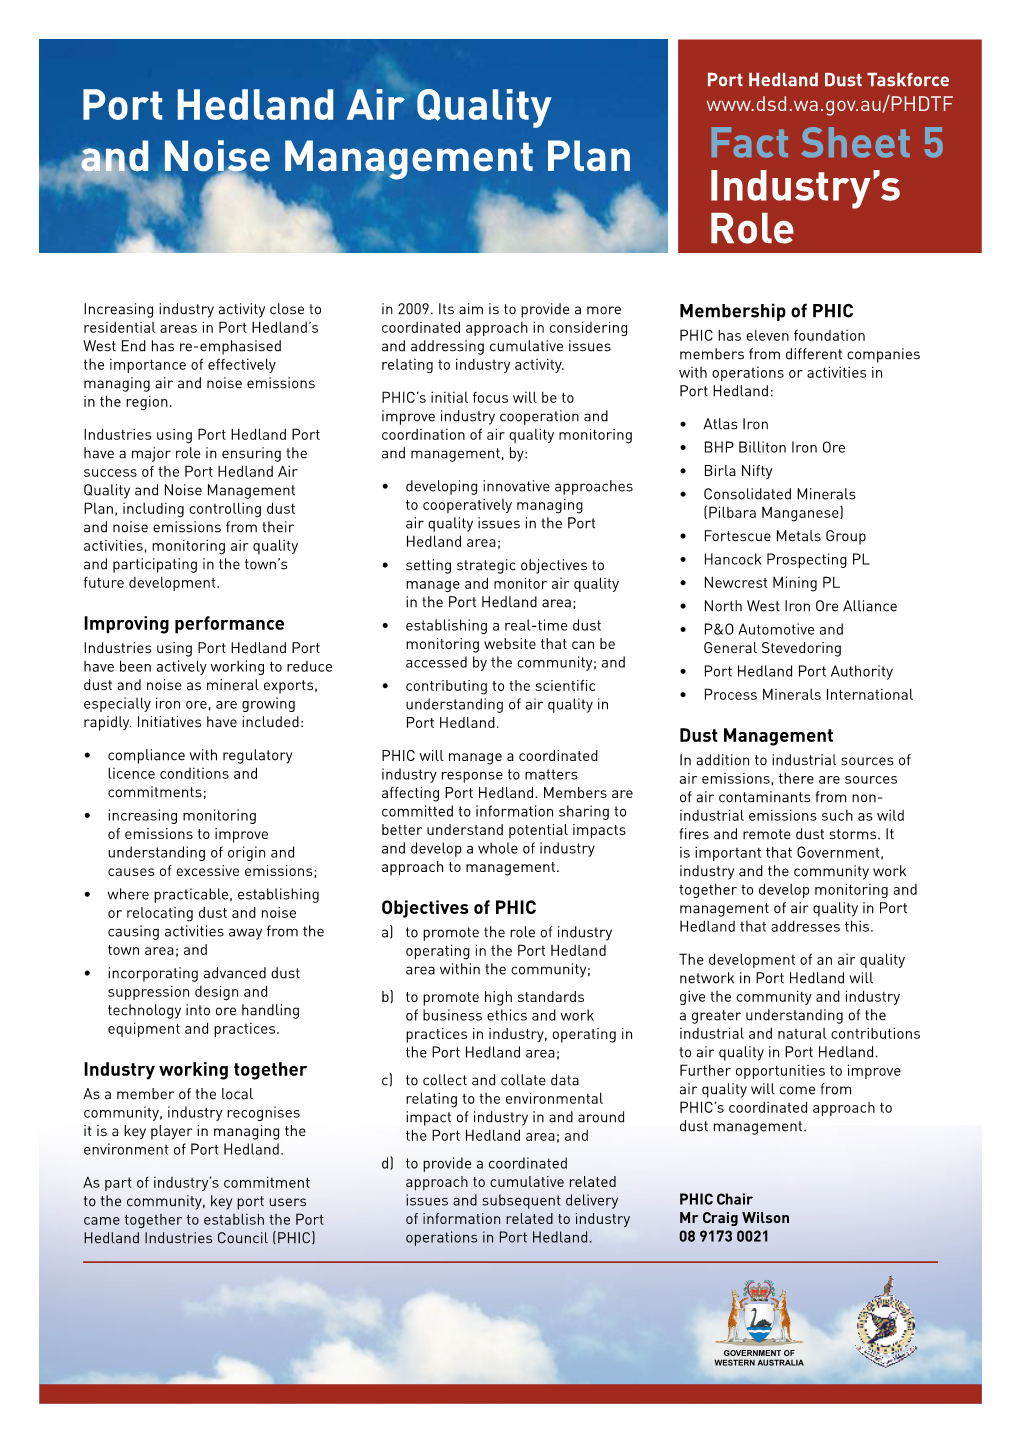 Port Hedland Air Quality and Noise Management Plan Fact Sheet 5